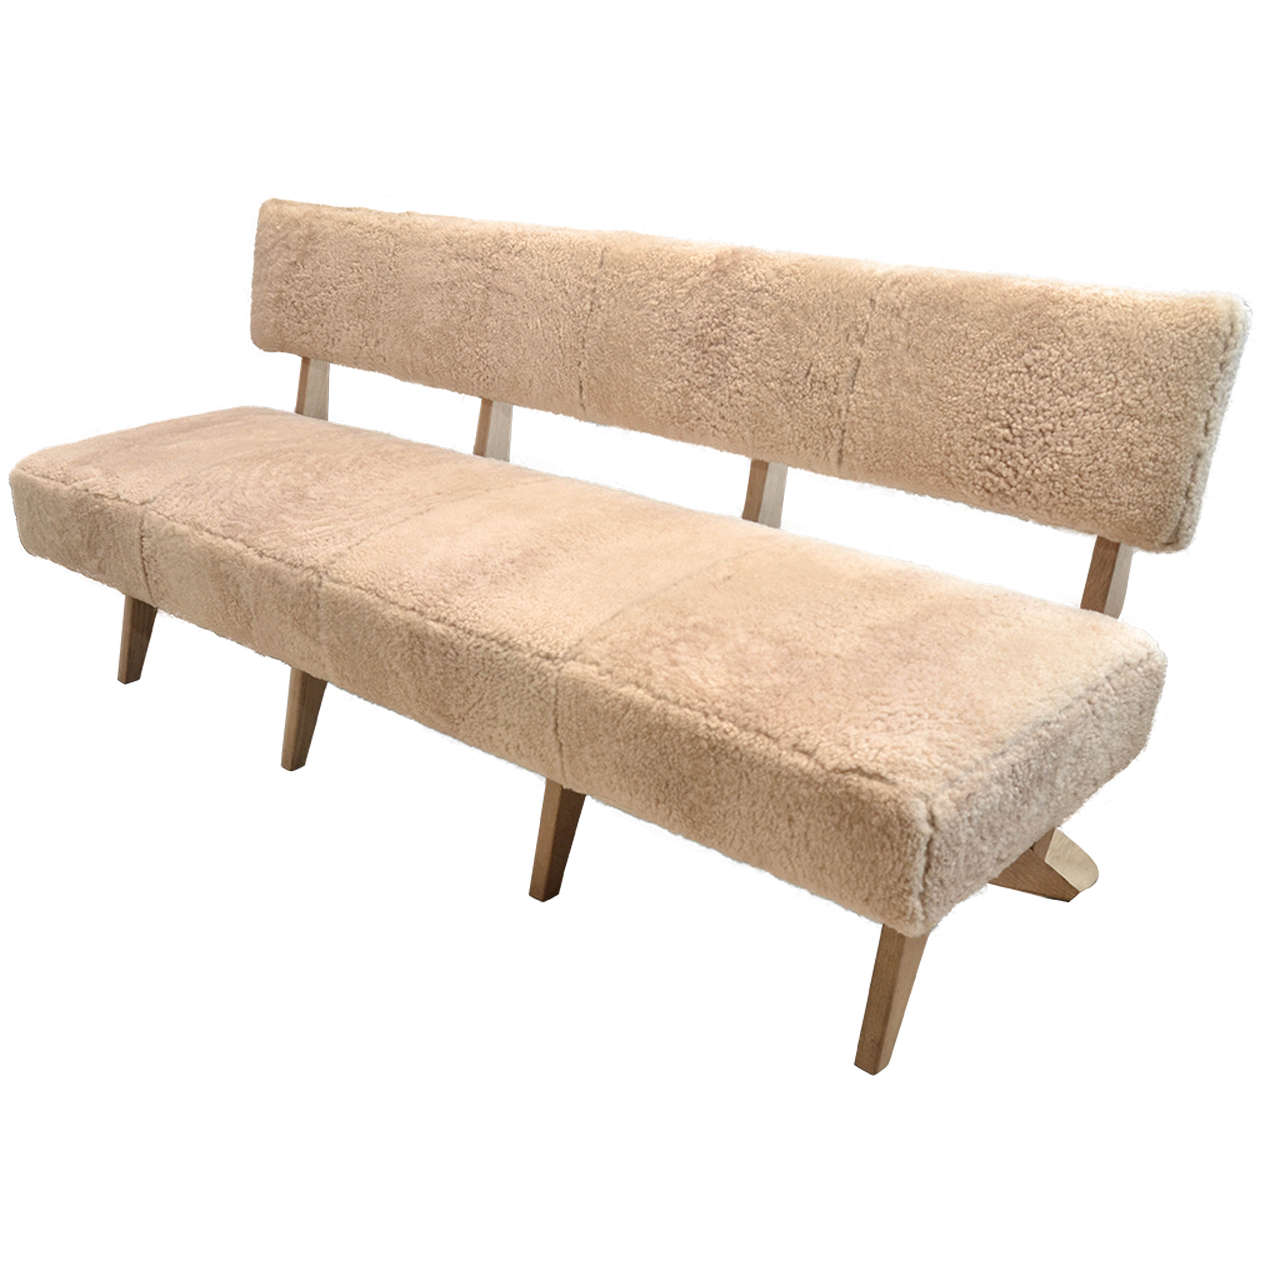 Contemporary "Metropole N.2" Bench in Shearling Designed by MONC XIII